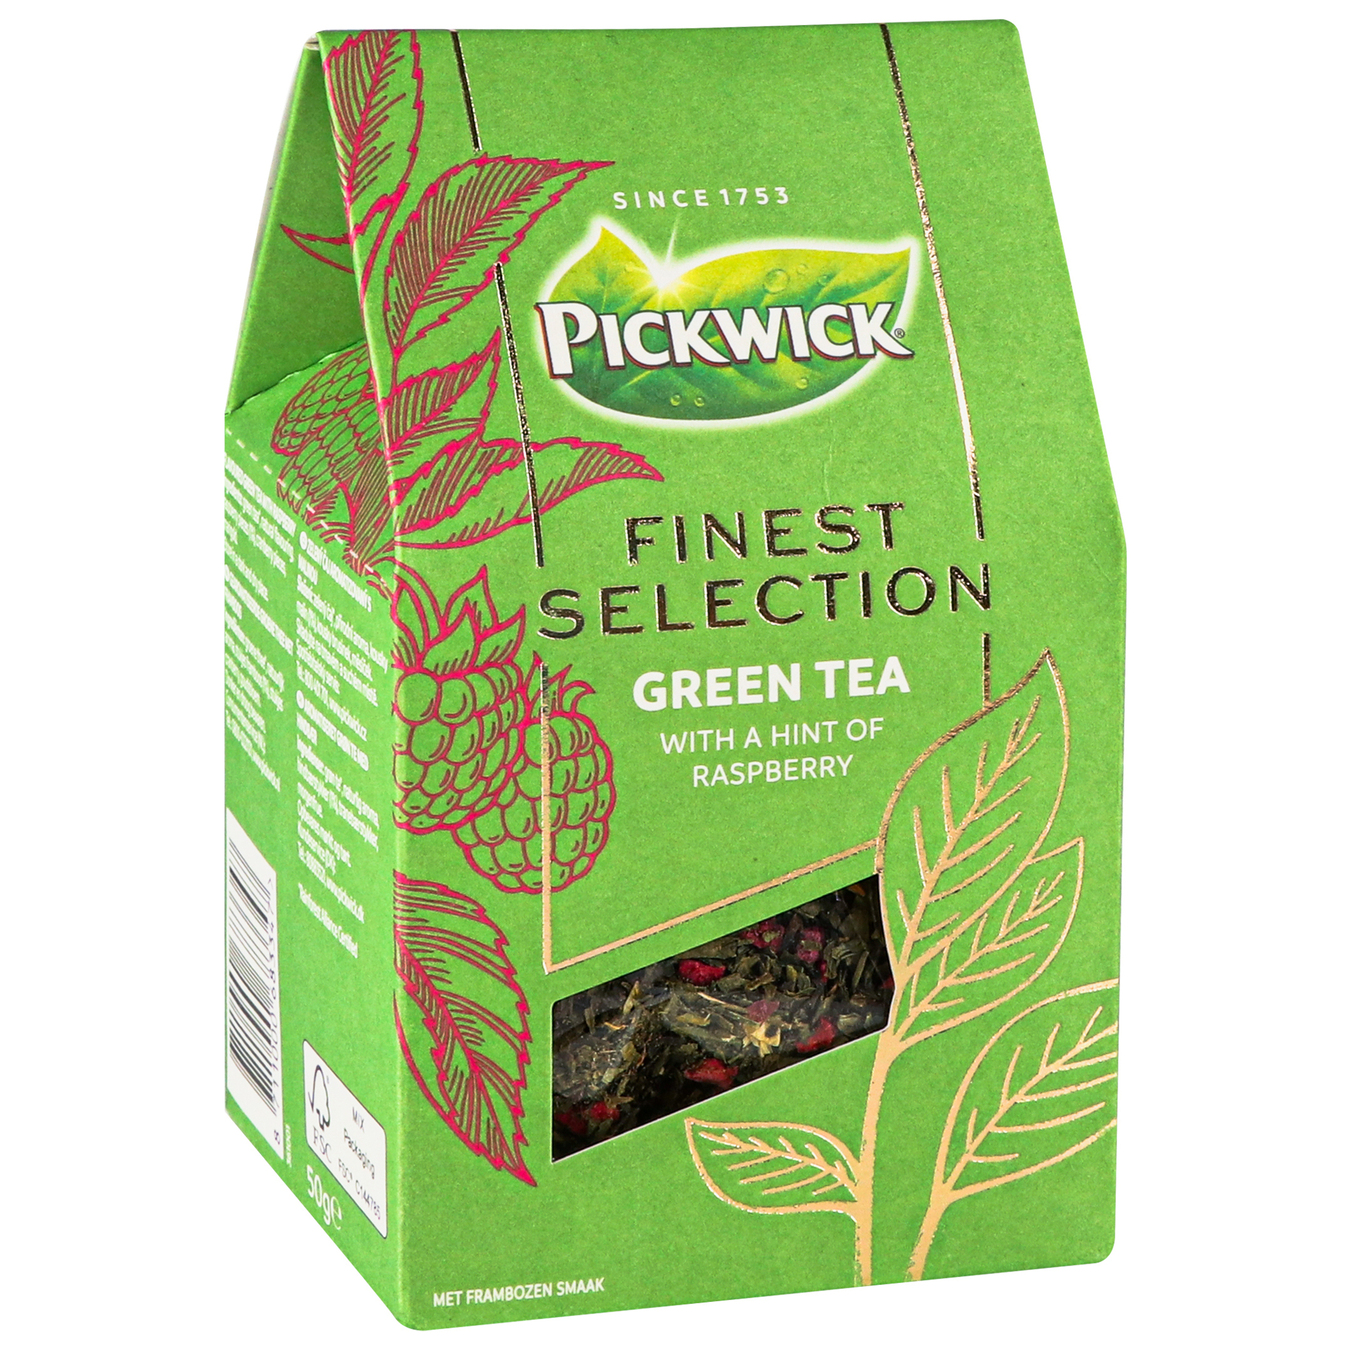 Pickwick green tea flavored with pieces of berries 50g 5